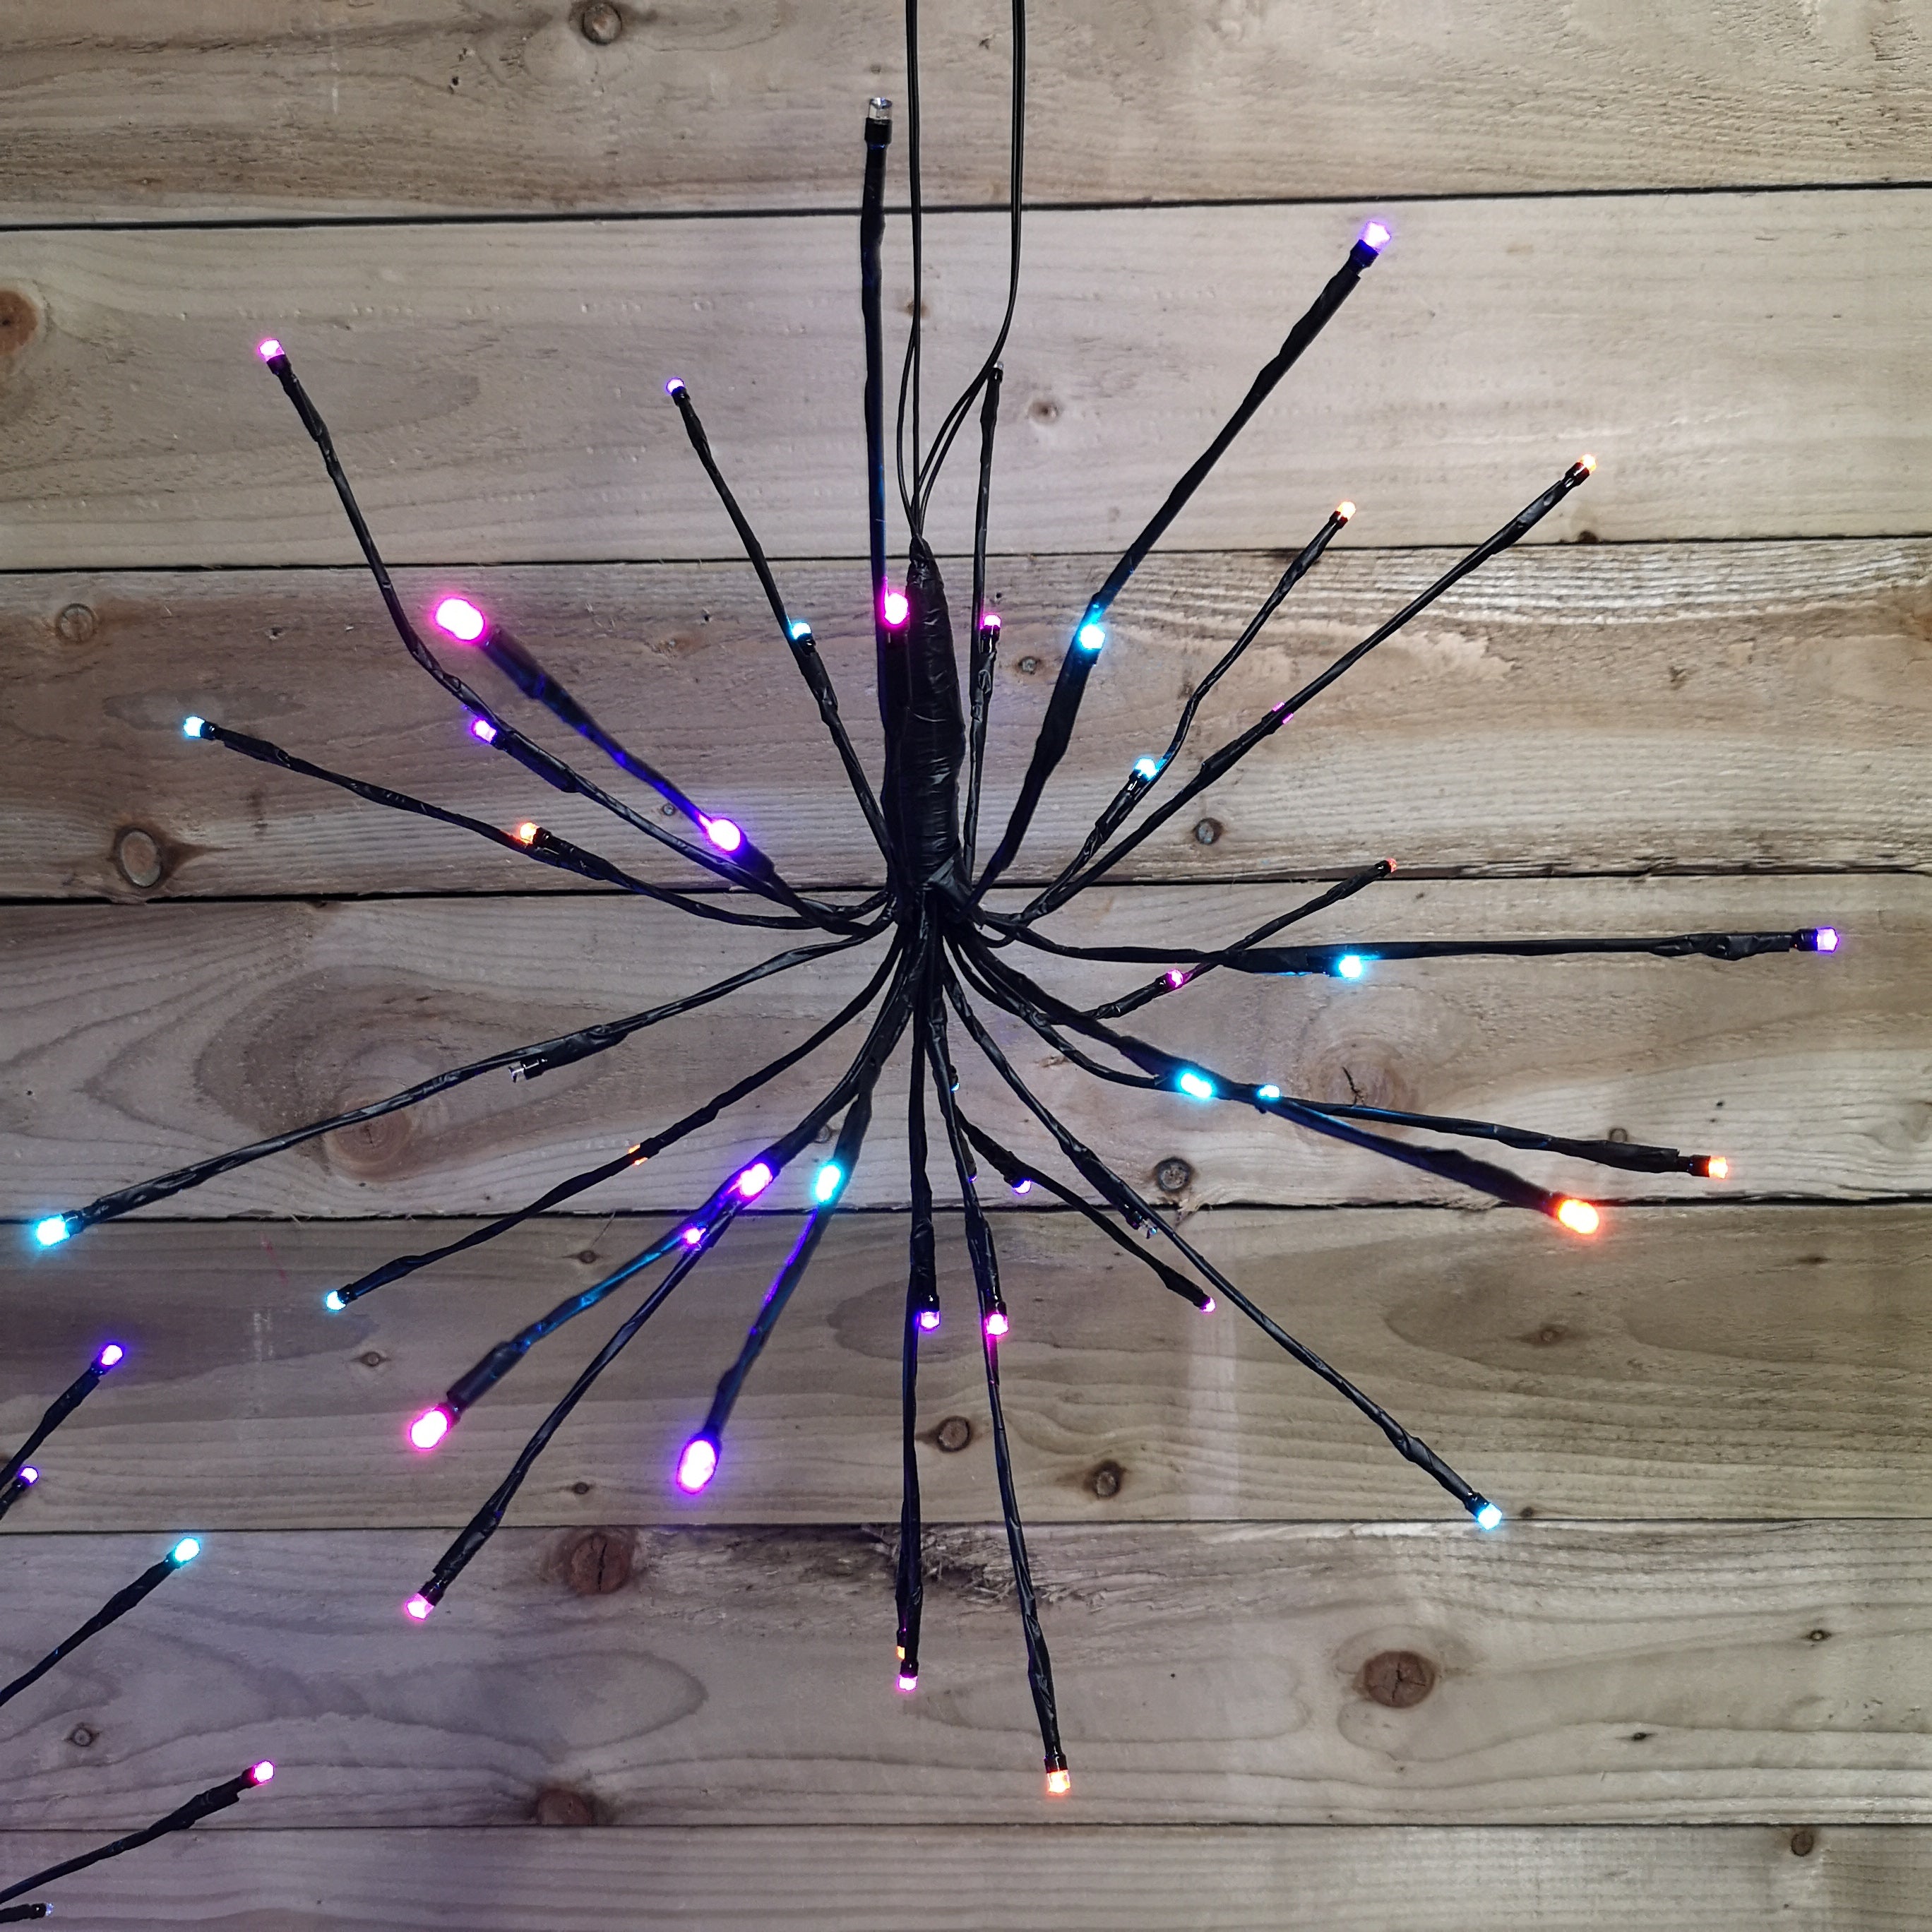 Set Of 4 45cm Premier Christmas Indoor Outdoor Sparkle Ball Twinkling LED Lights in Rainbow